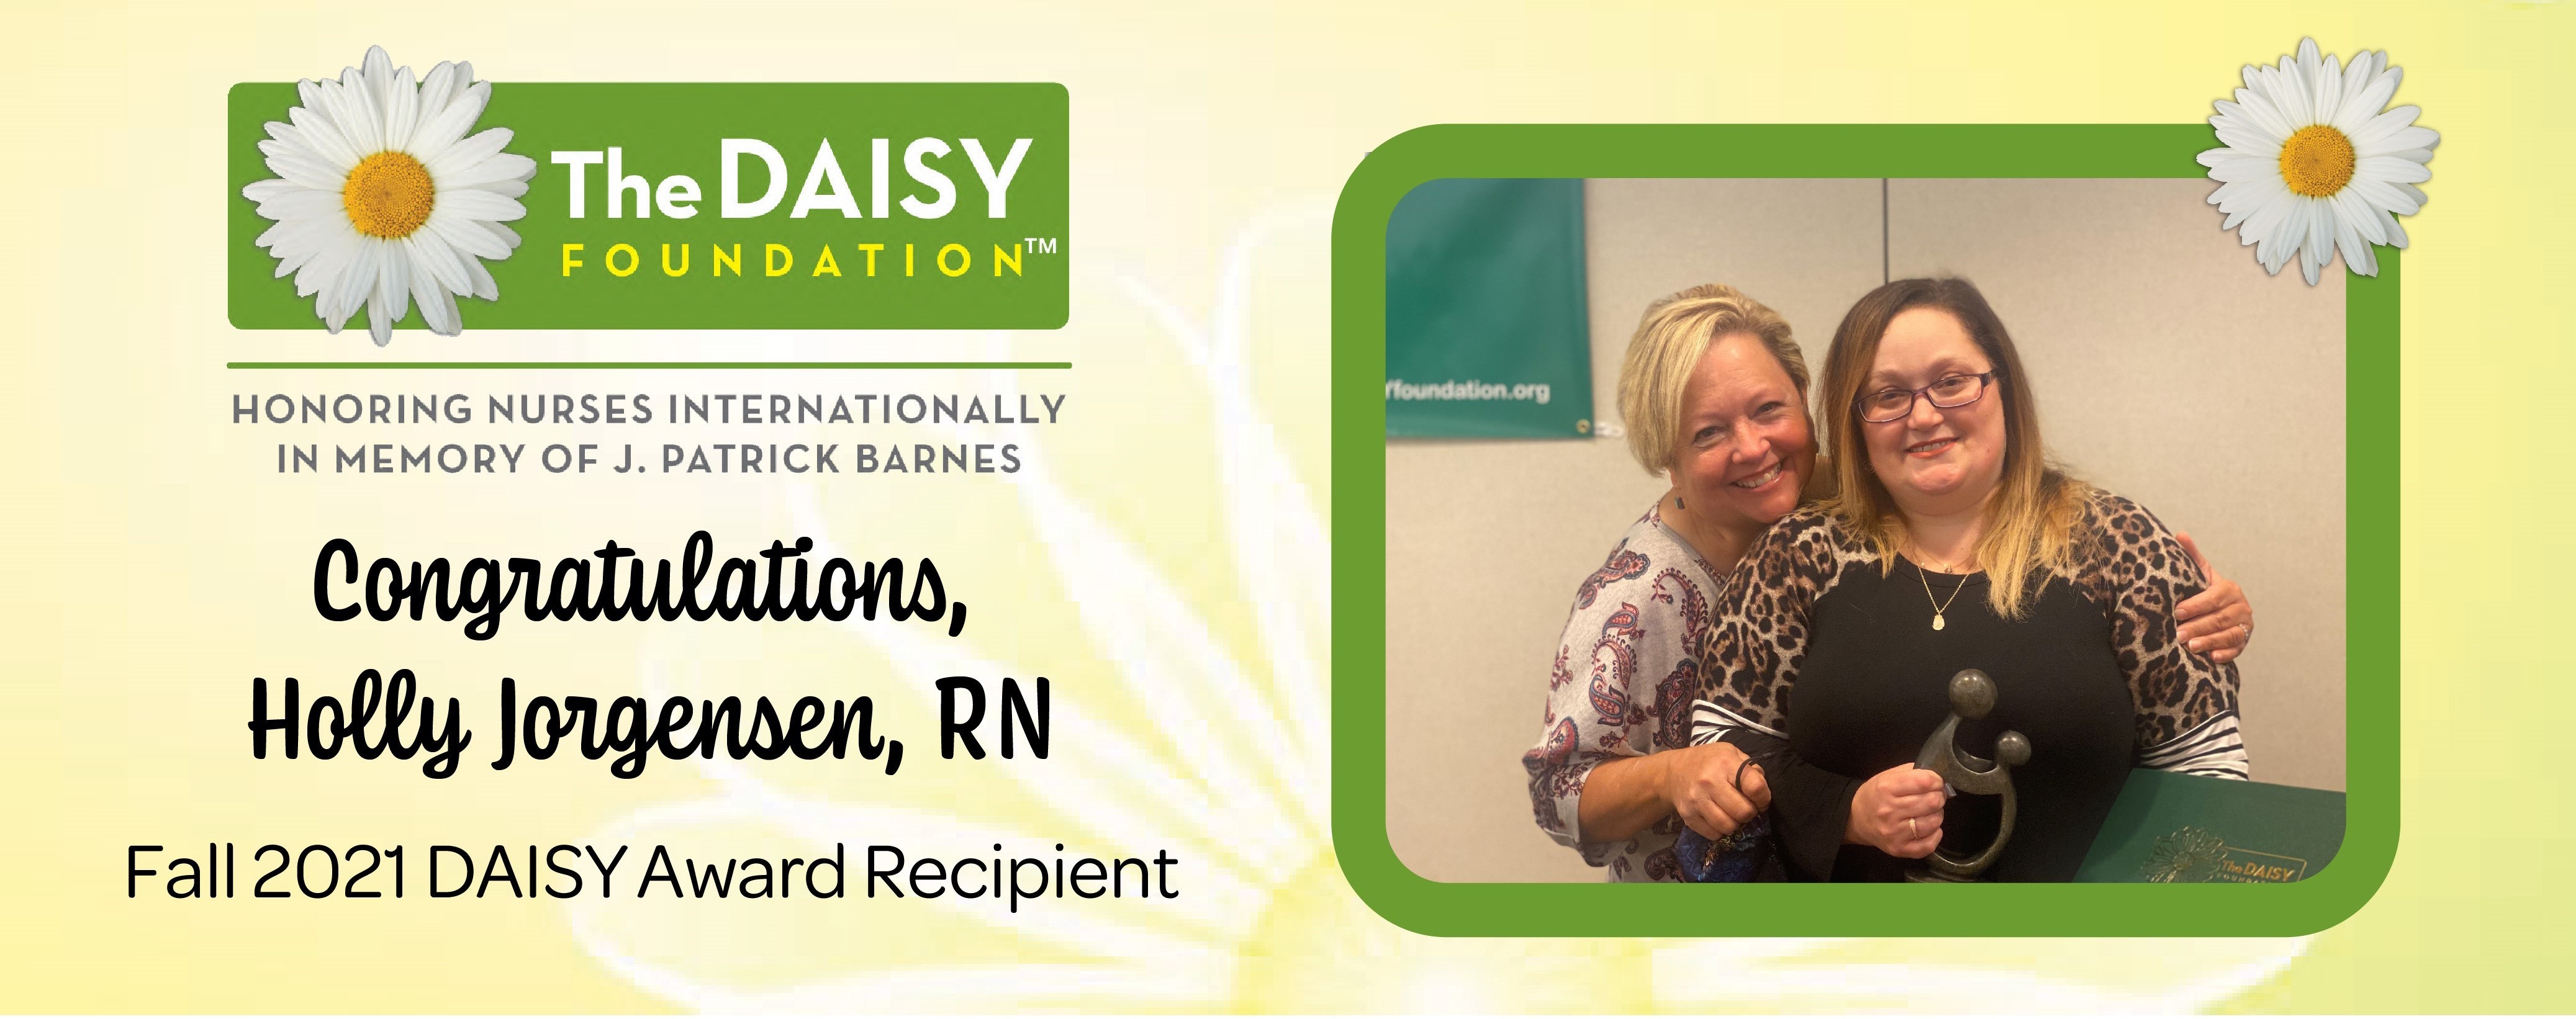 Banner picture of Holly Jorgensen, RN
Banner says:
The DAISY
FOUNDATION

HONORING NURSES INTERNATIONALLY IN MEMORY OF J. PATRICK BARNES
Congratulations,
Holly Jorgensen, RN
Fall 2021 DAISY Award Recipient